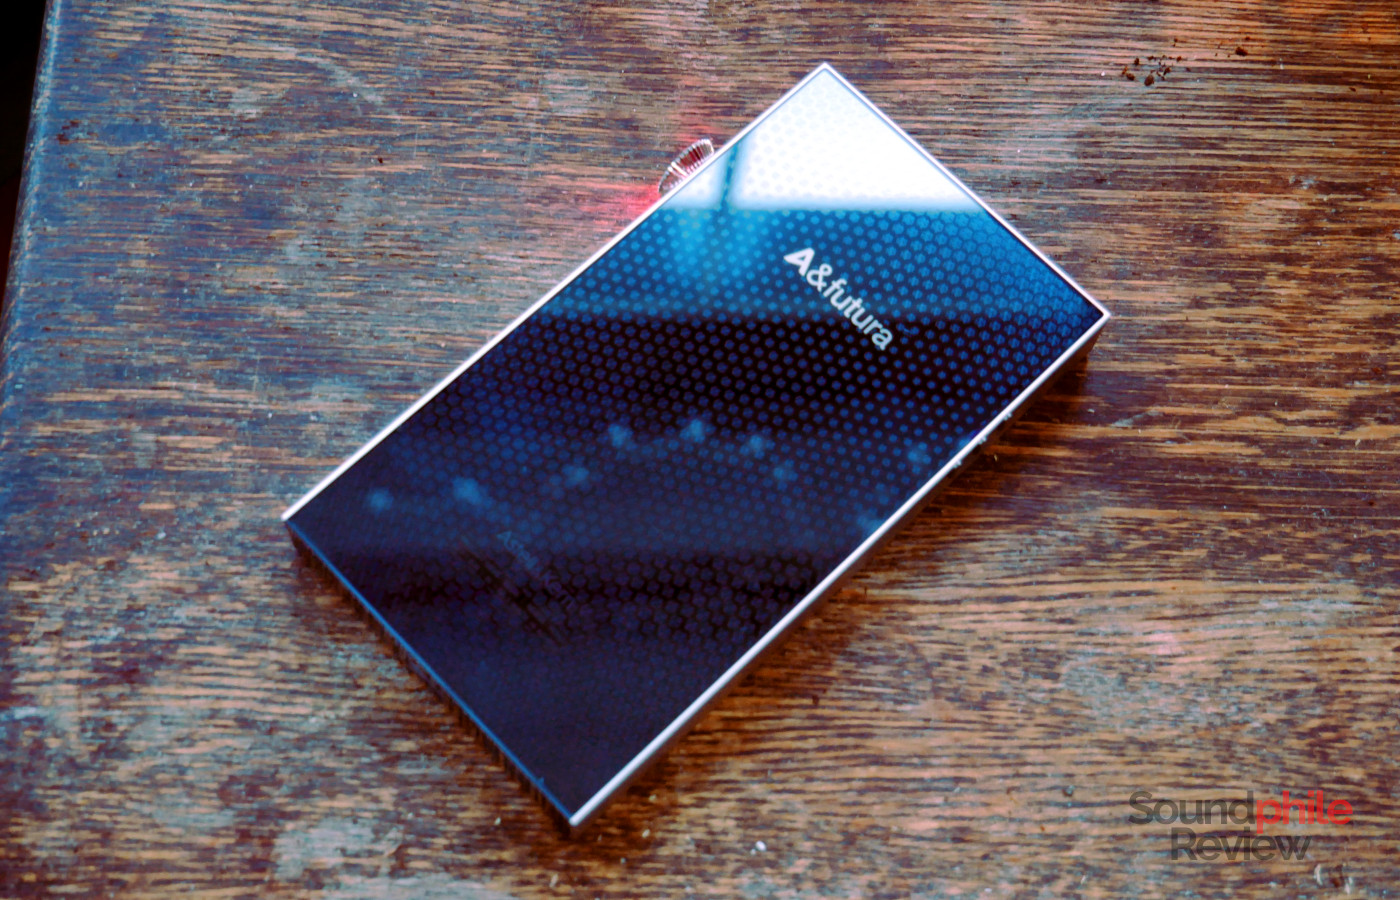 The back of the Astell&Kern SE300 has a complex pattern.